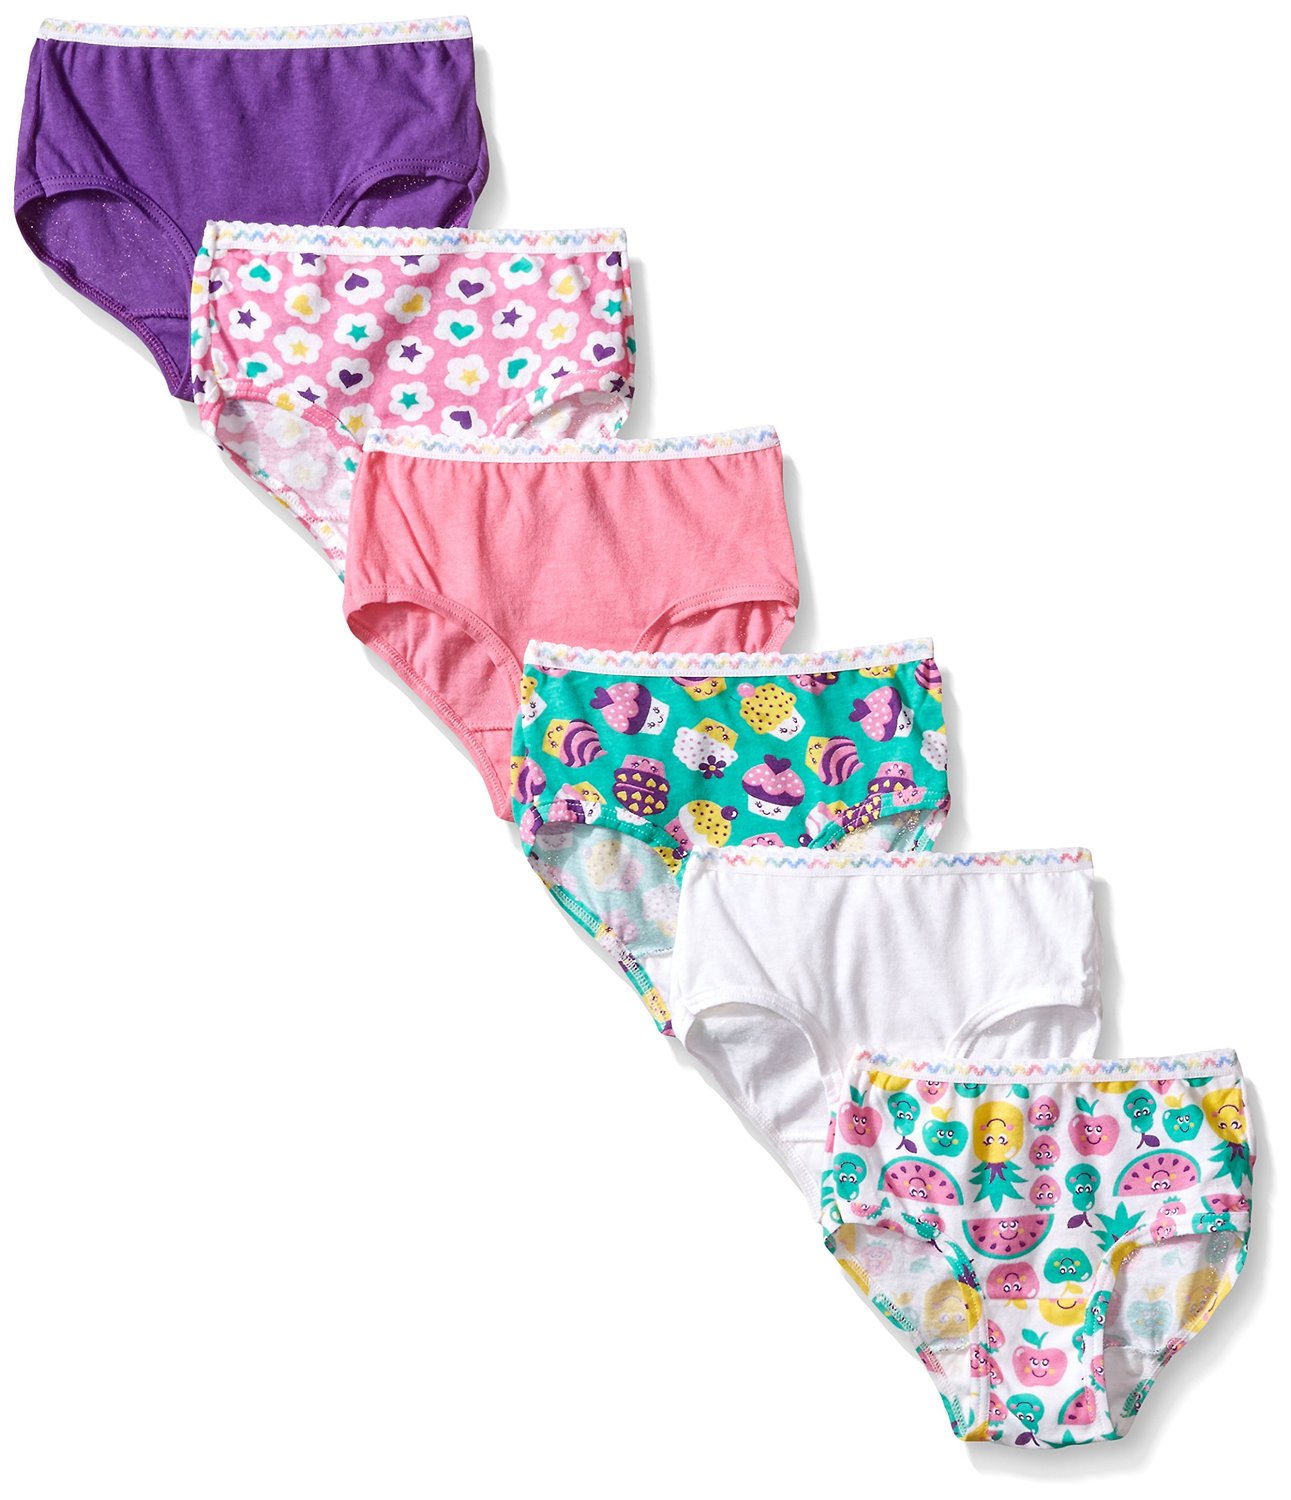 Hanes Girls' and Toddler Assorted Briefs - Product Description and